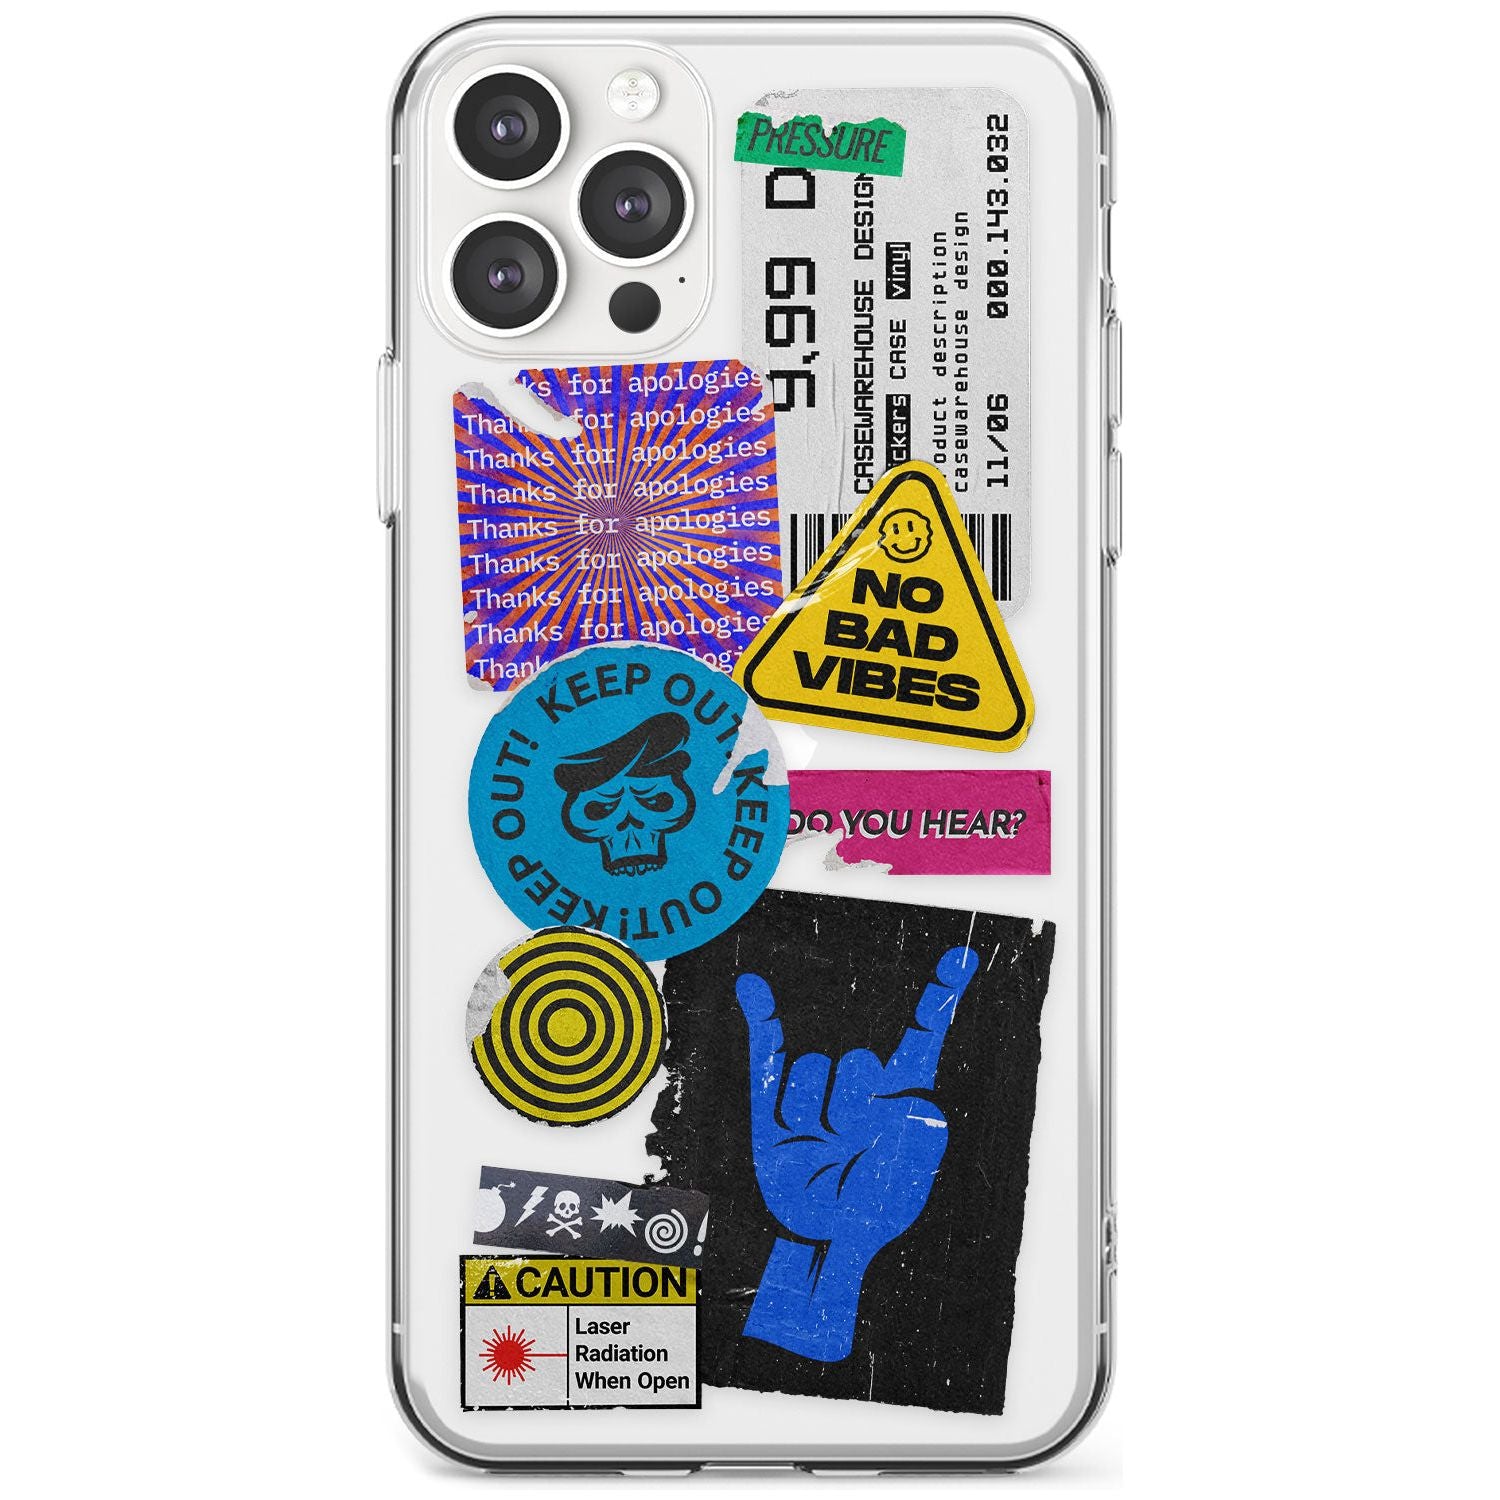 No Bad Vibes Sticker Mix Black Impact Phone Case for iPhone 11 Pro Max